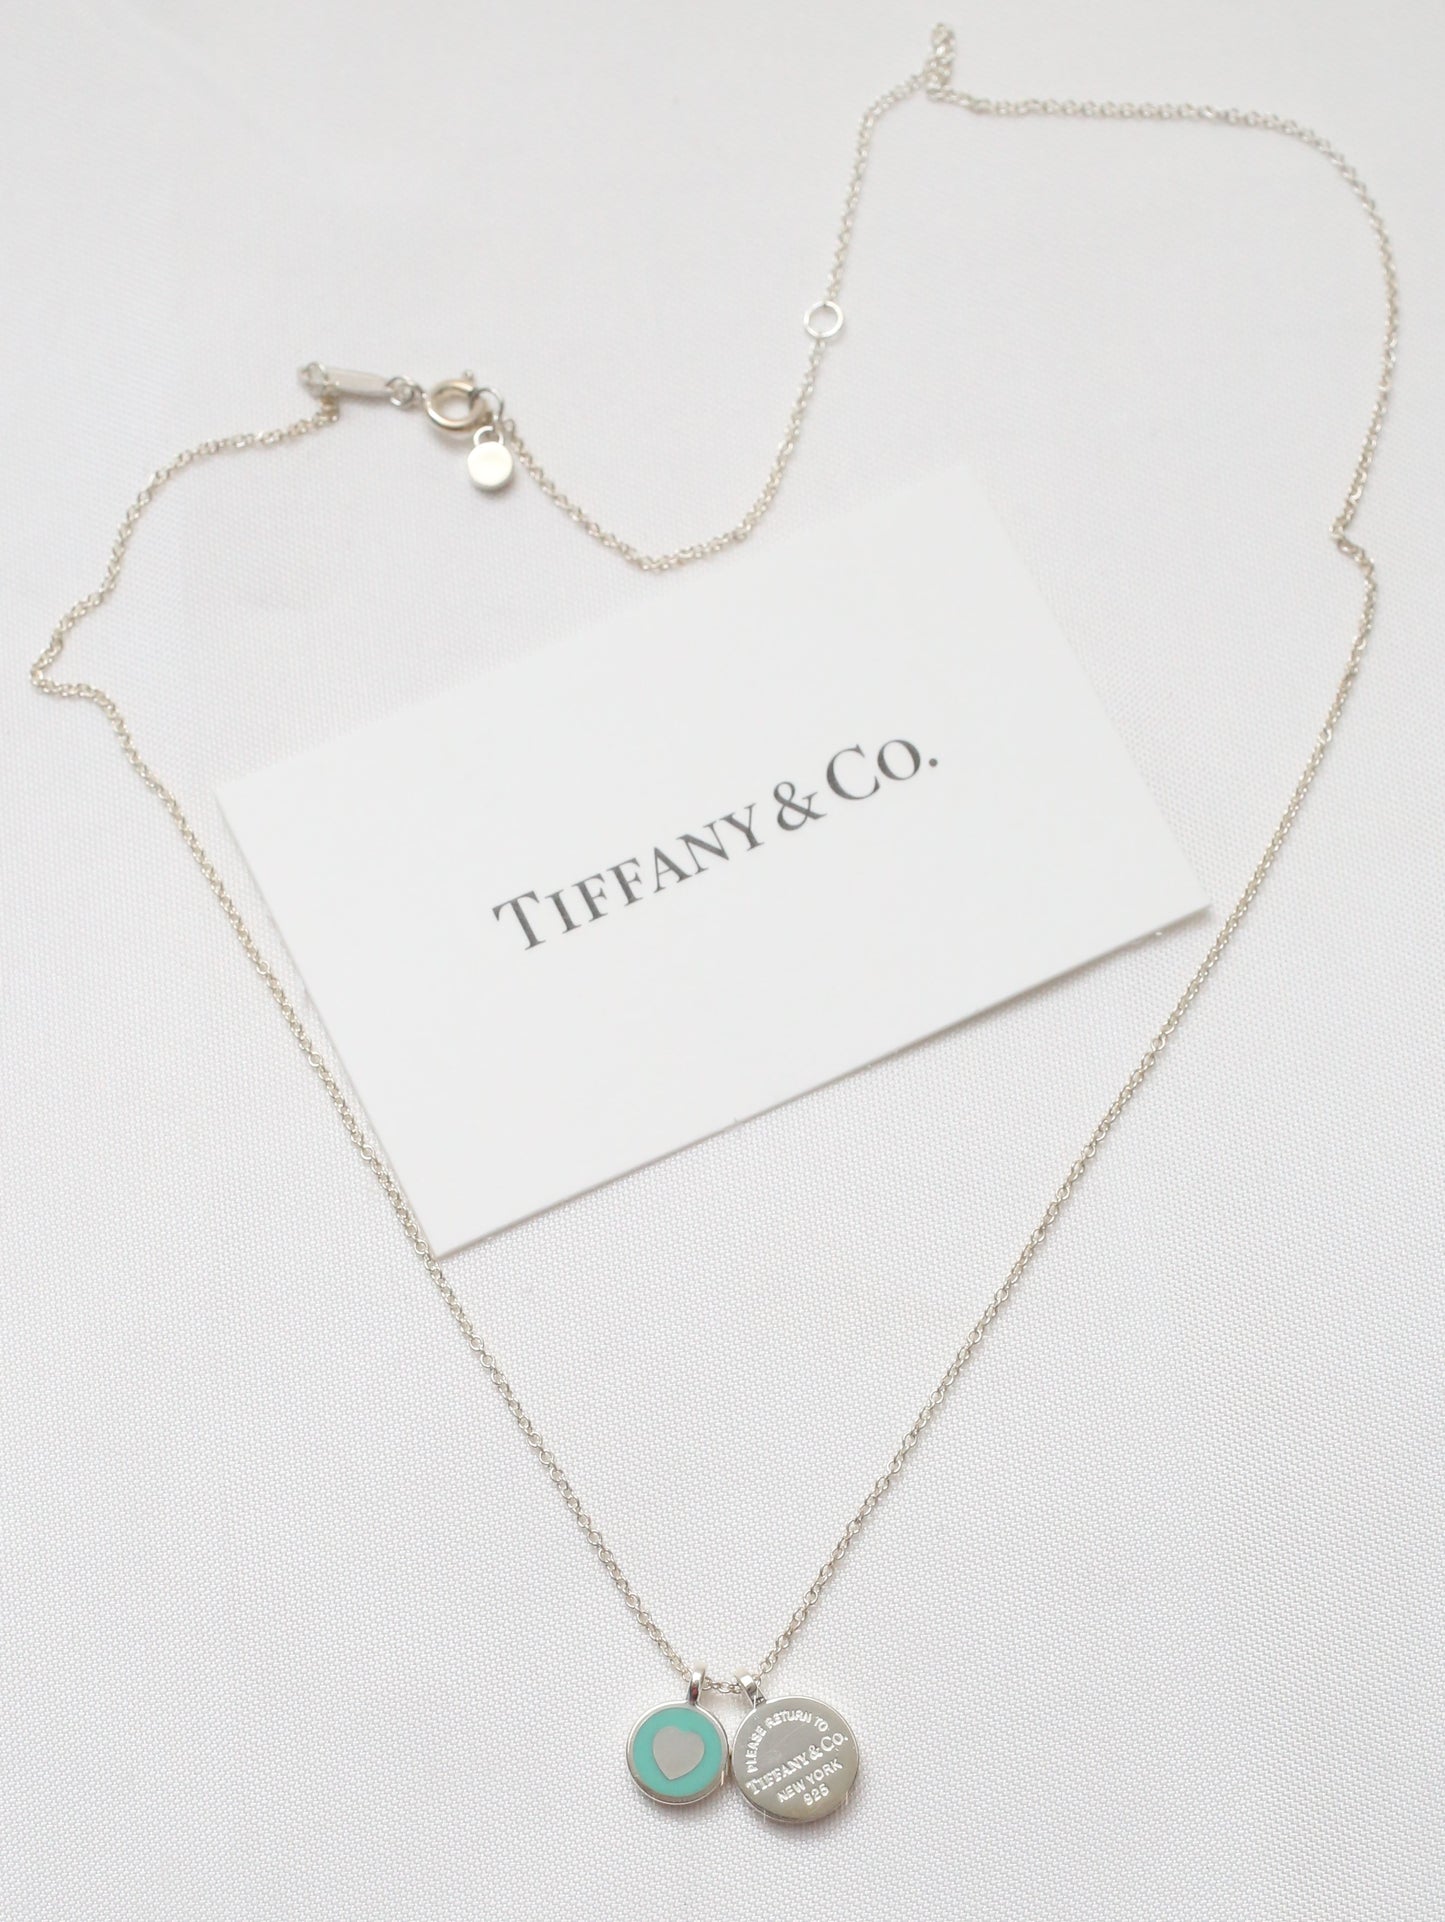 Tiffany & Co Sterling Silver Double Circle Enamel Tag Necklace, 16-18inches - 4.3g